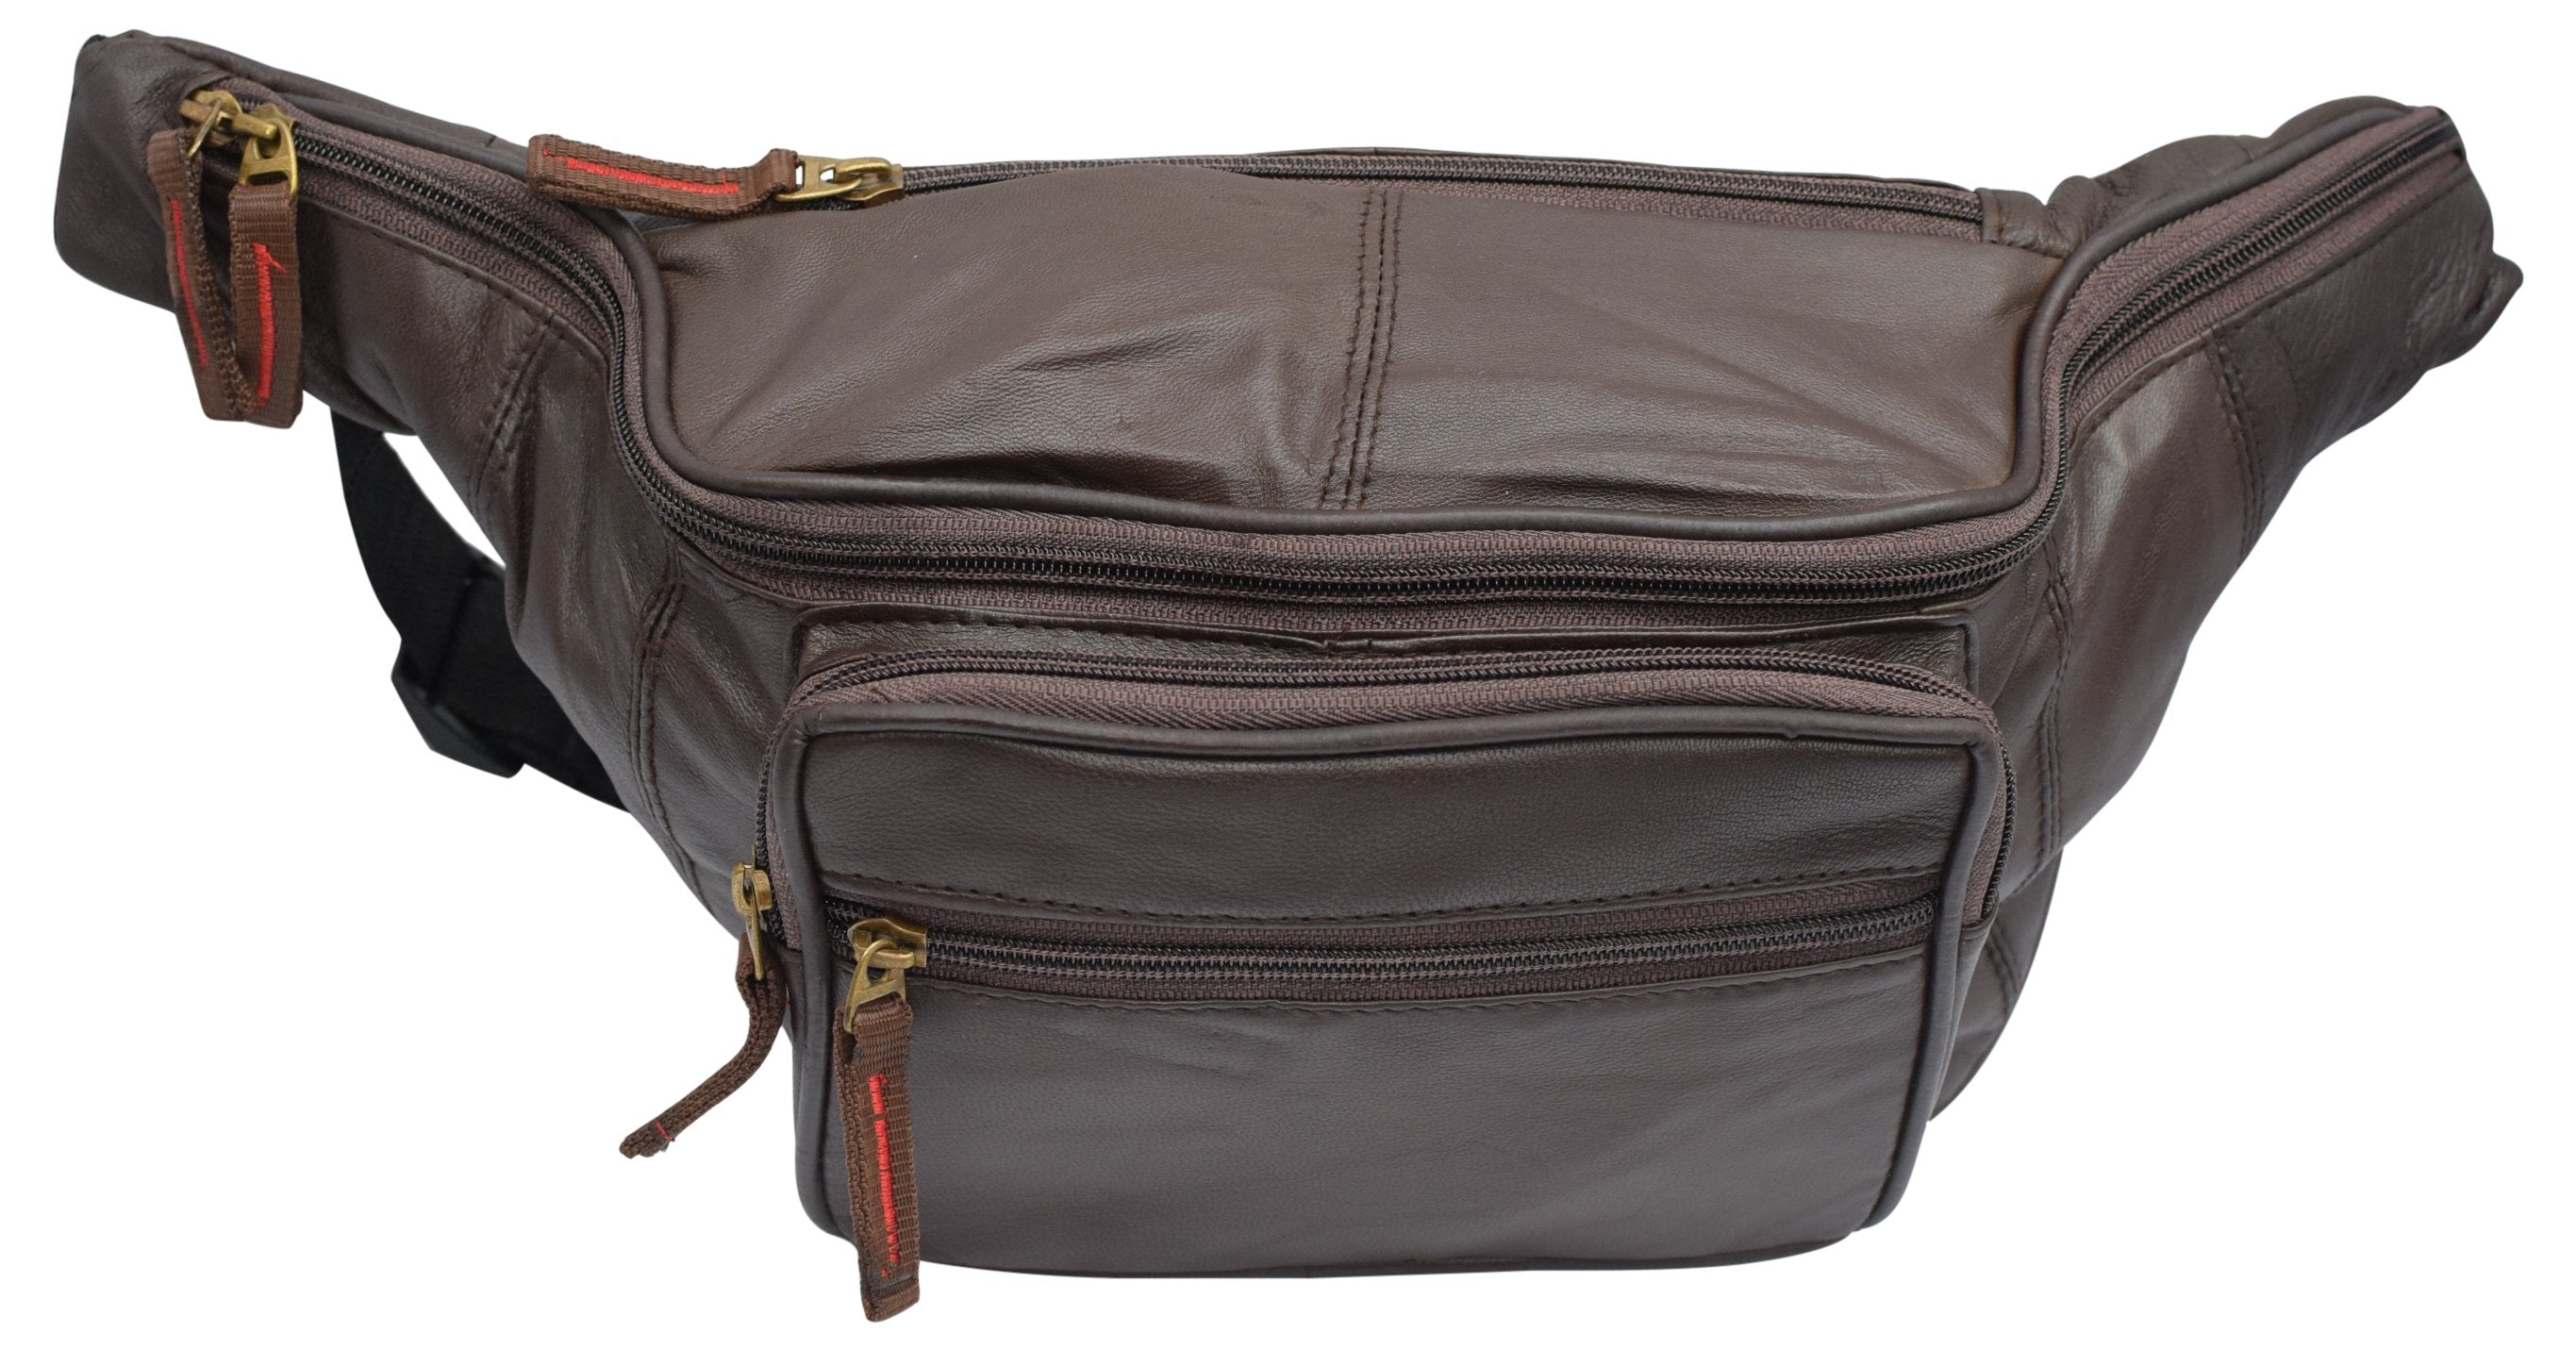 Best Belt Bags and Fanny Packs: 10 Stylish Options to Keep You Organized |  TIME Stamped